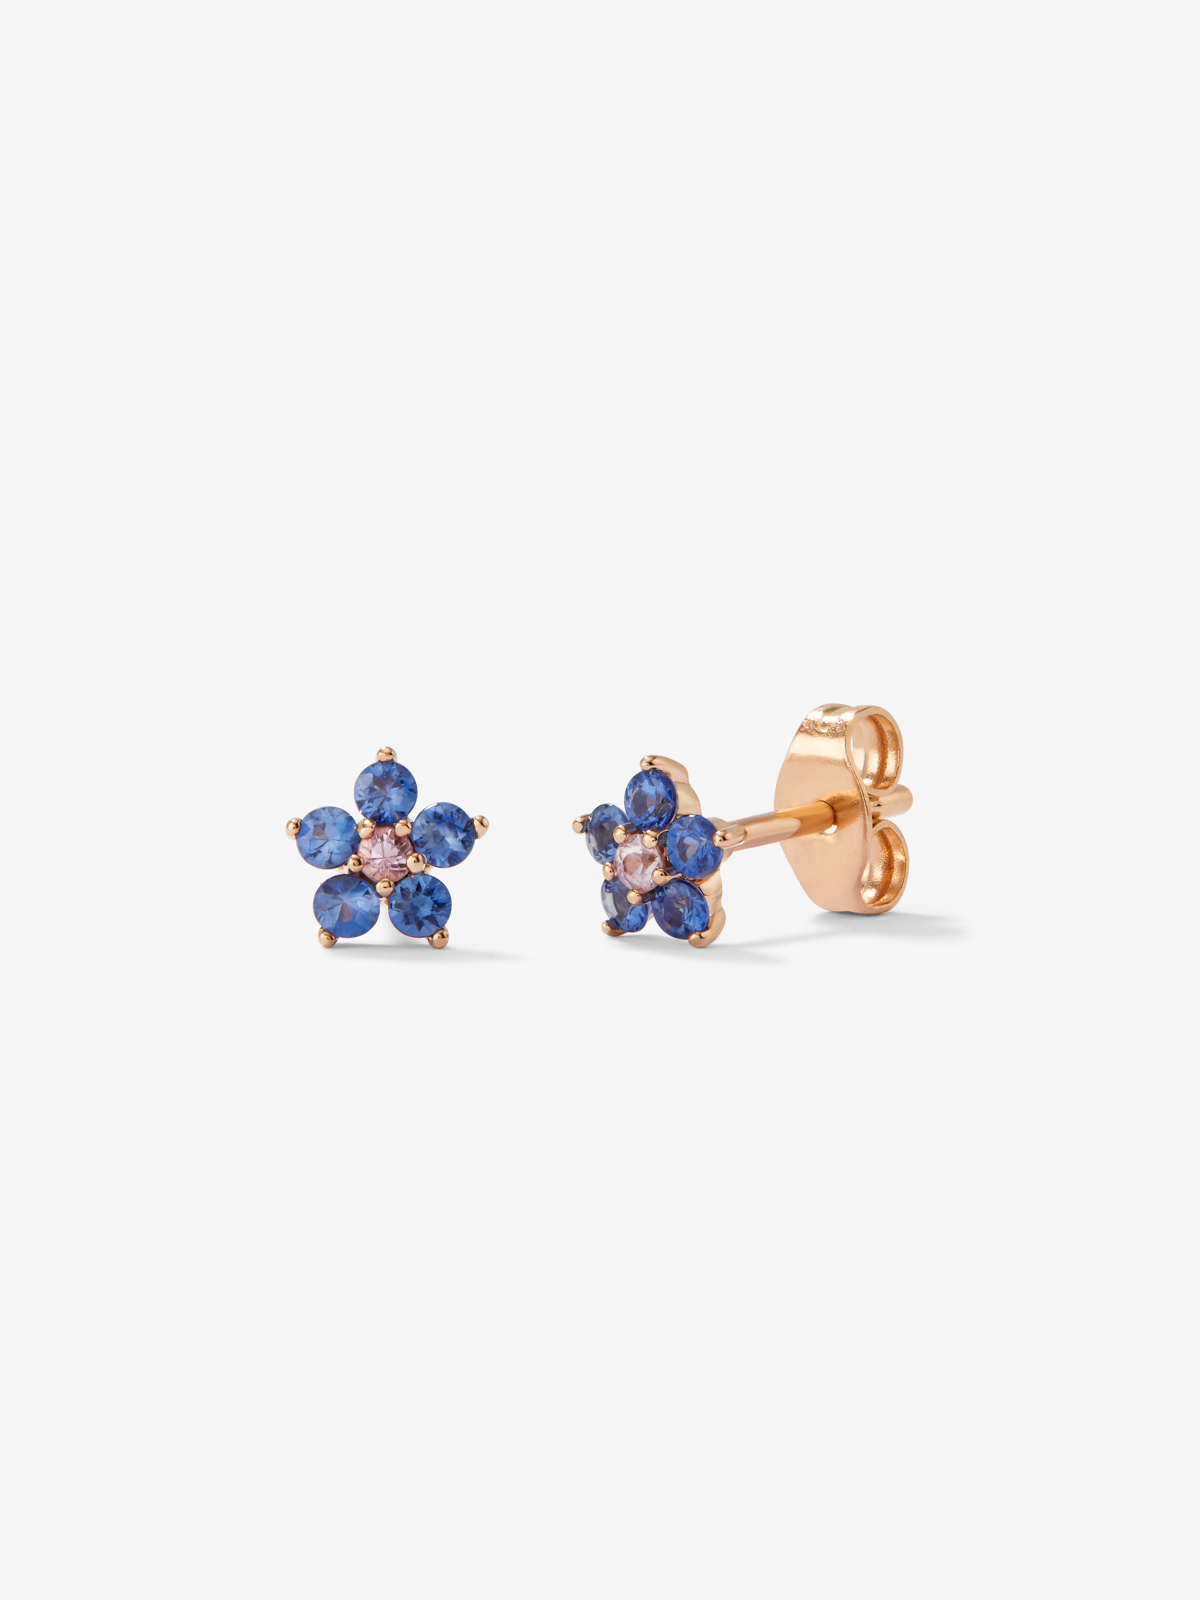 Frida earrings in rose gold with sapphire.